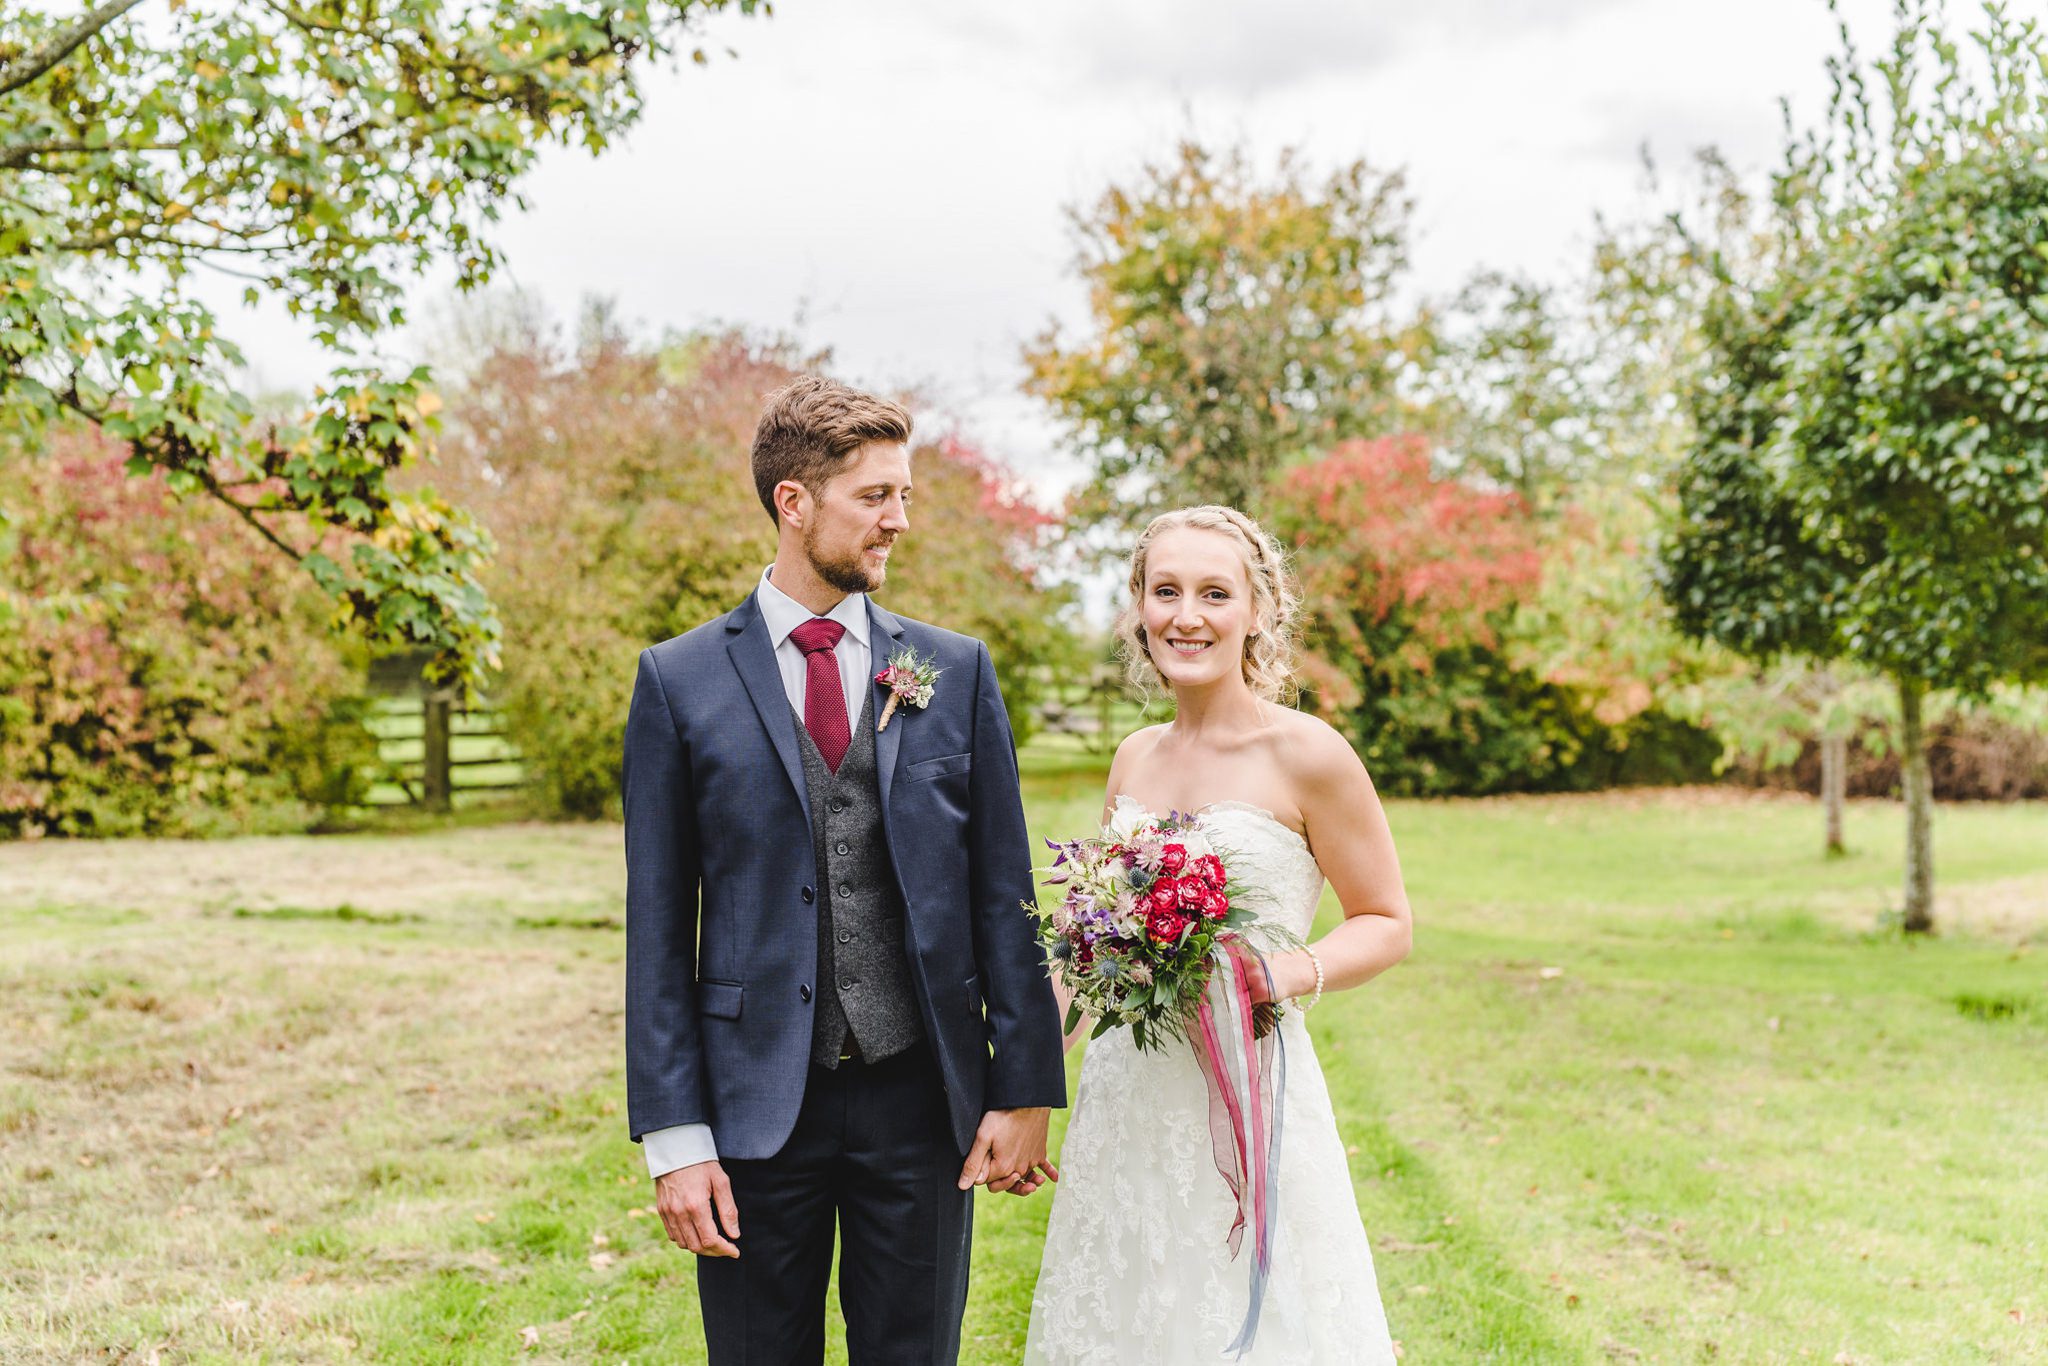 A colourful bride and groom in Worcestershire